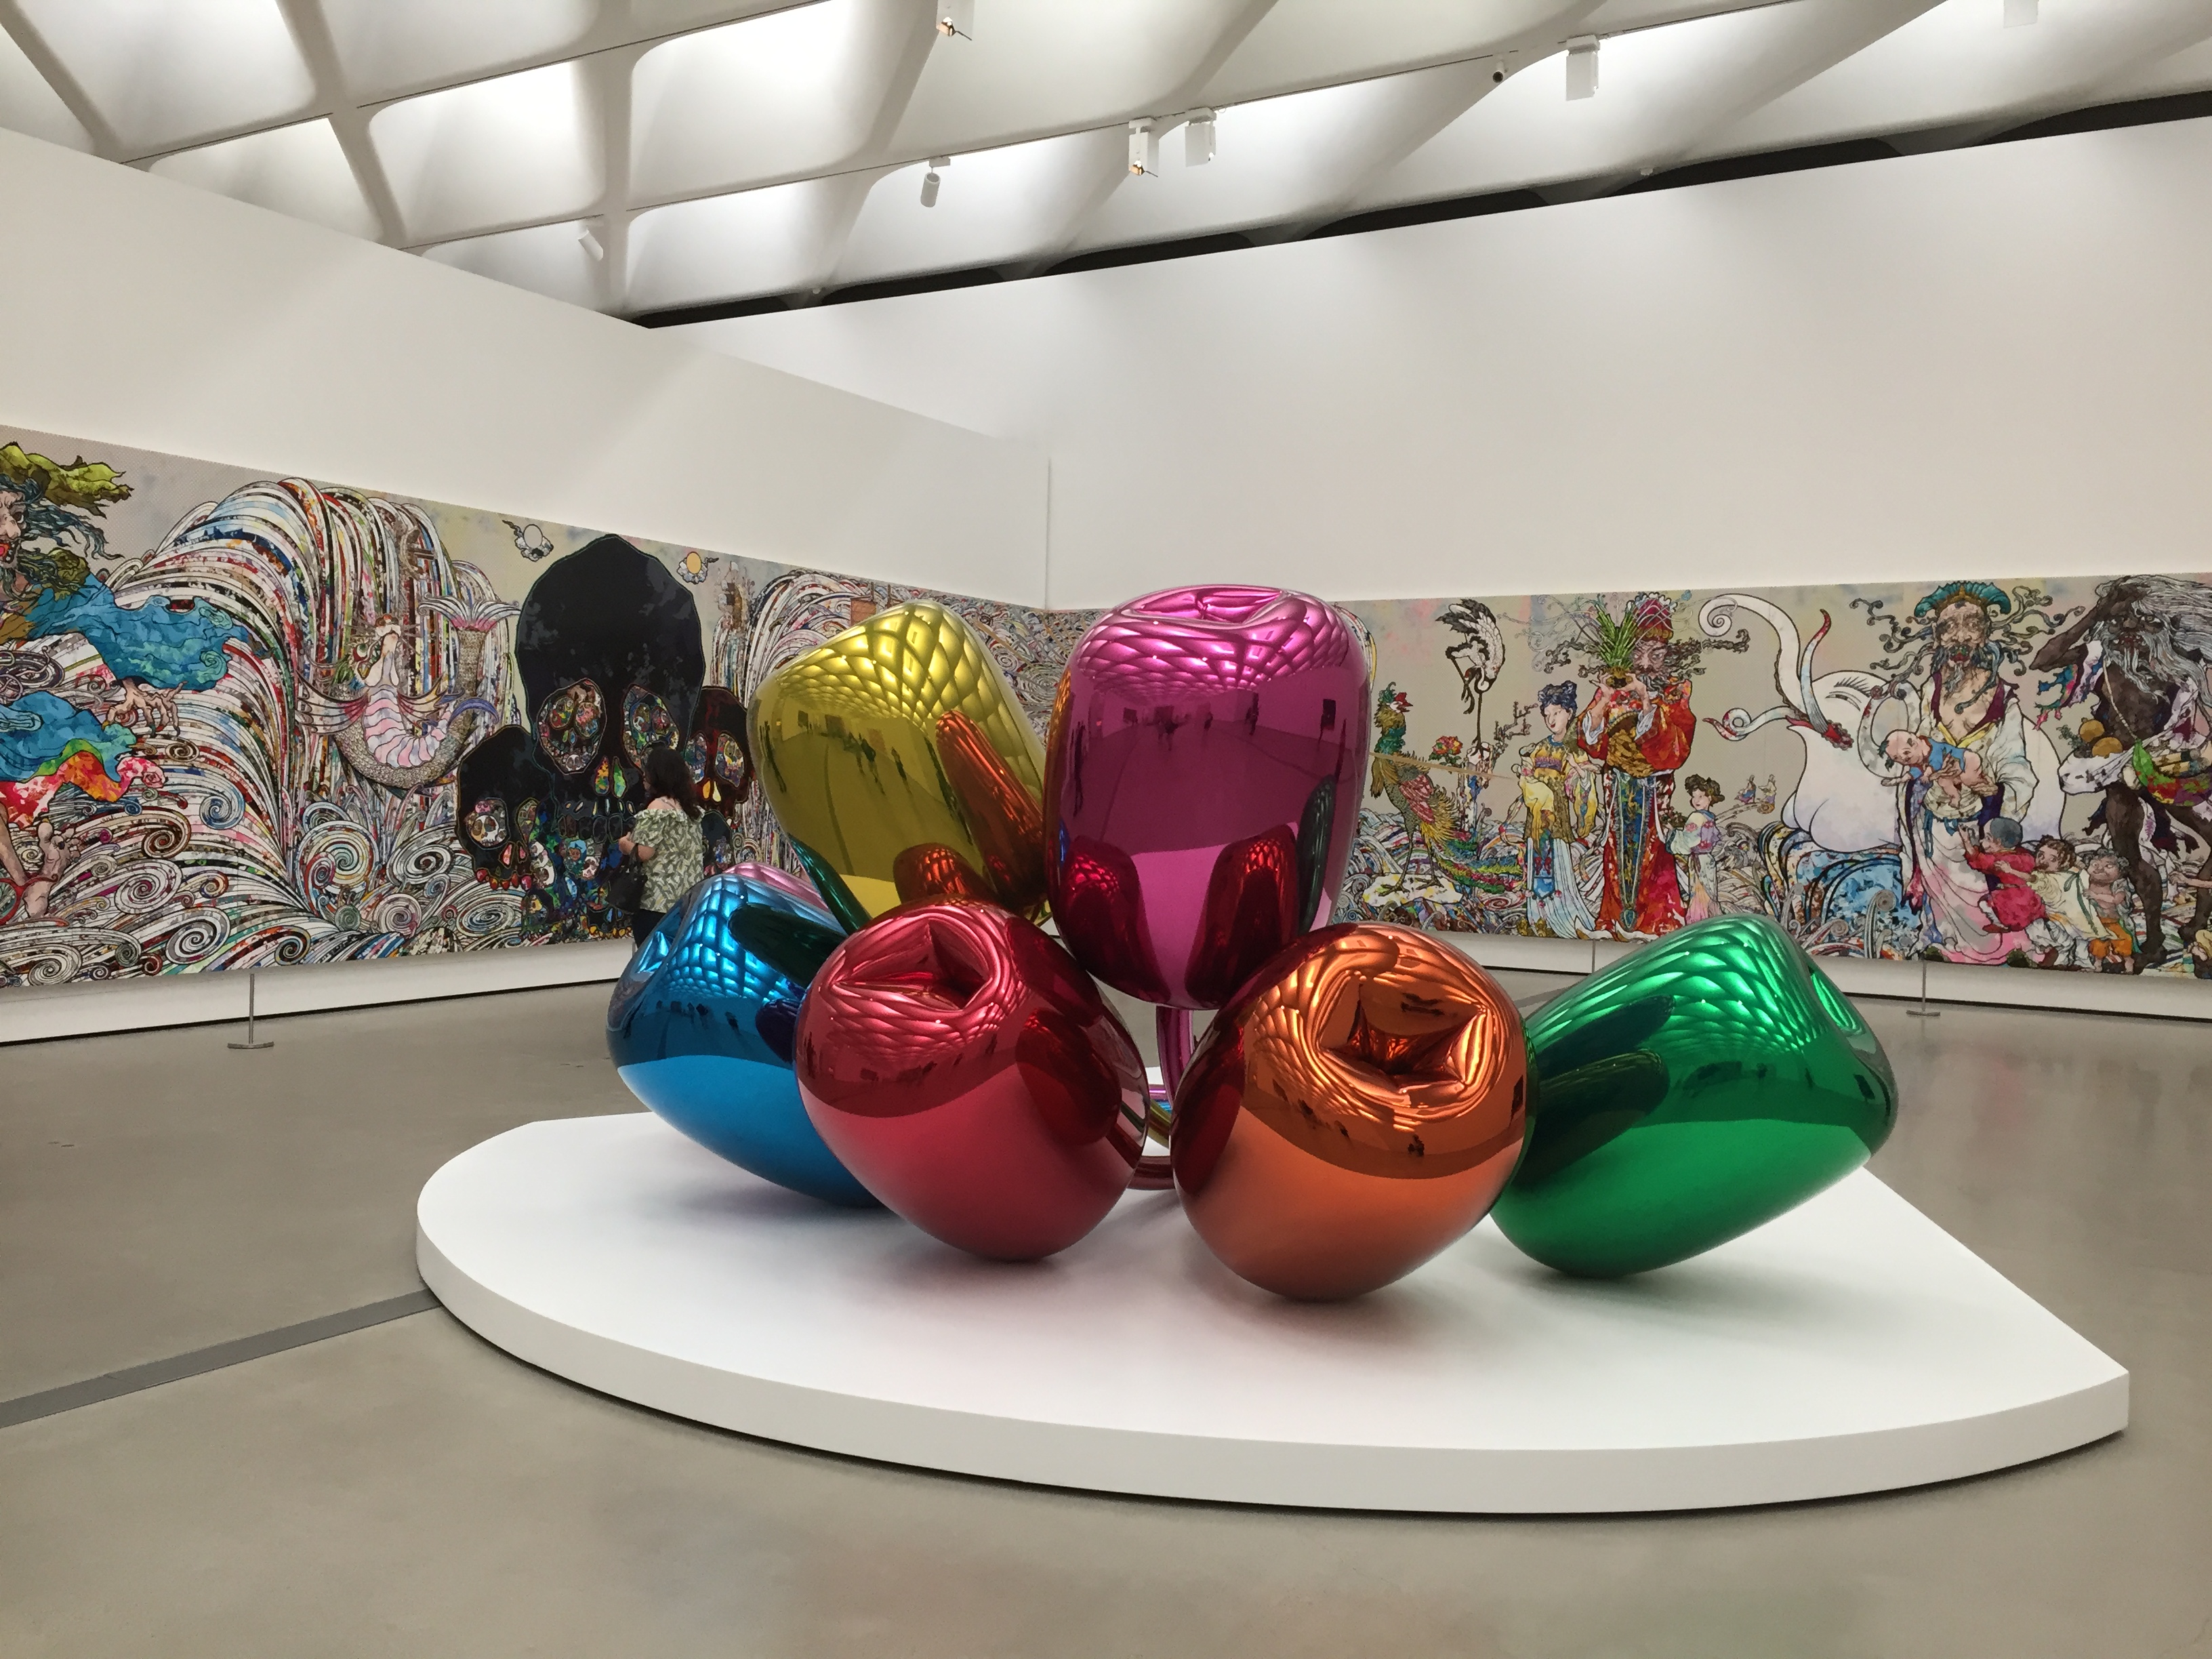 "Tulips" sculpture by Jeff Koons at The Broad, Downtown LA museum